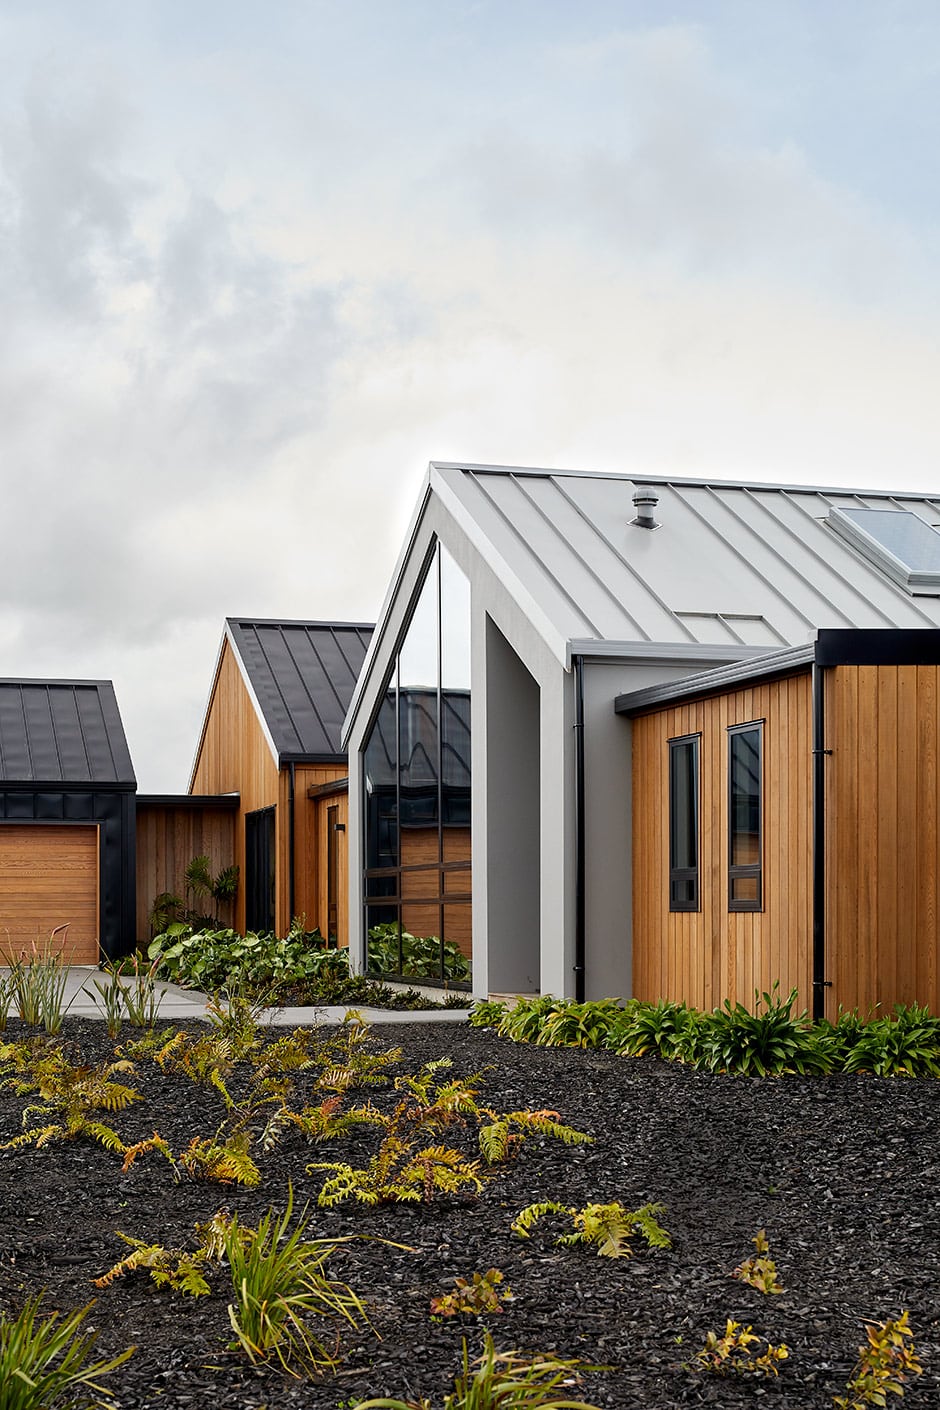 This rural New Plymouth property places the focus on guests and gathering